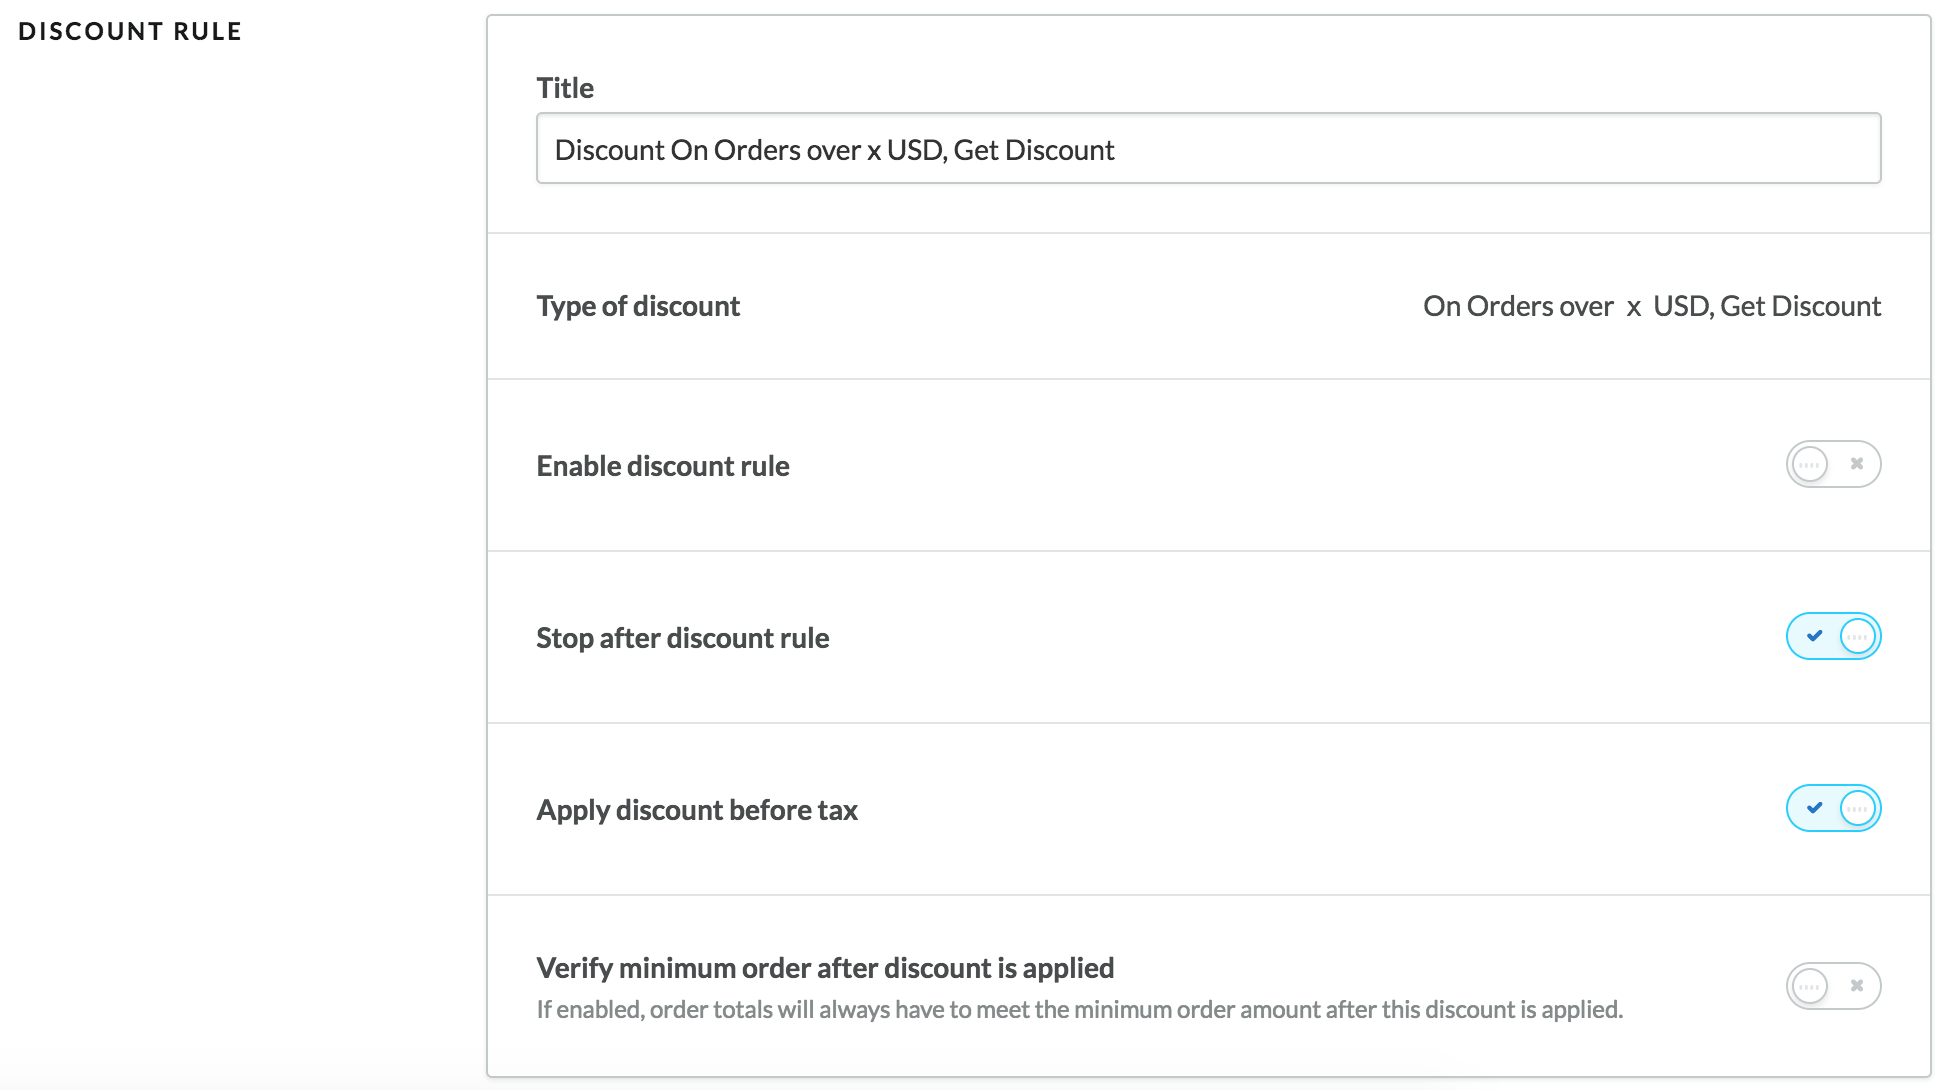 Shows the first 6 settings in the discount rule's instructions.